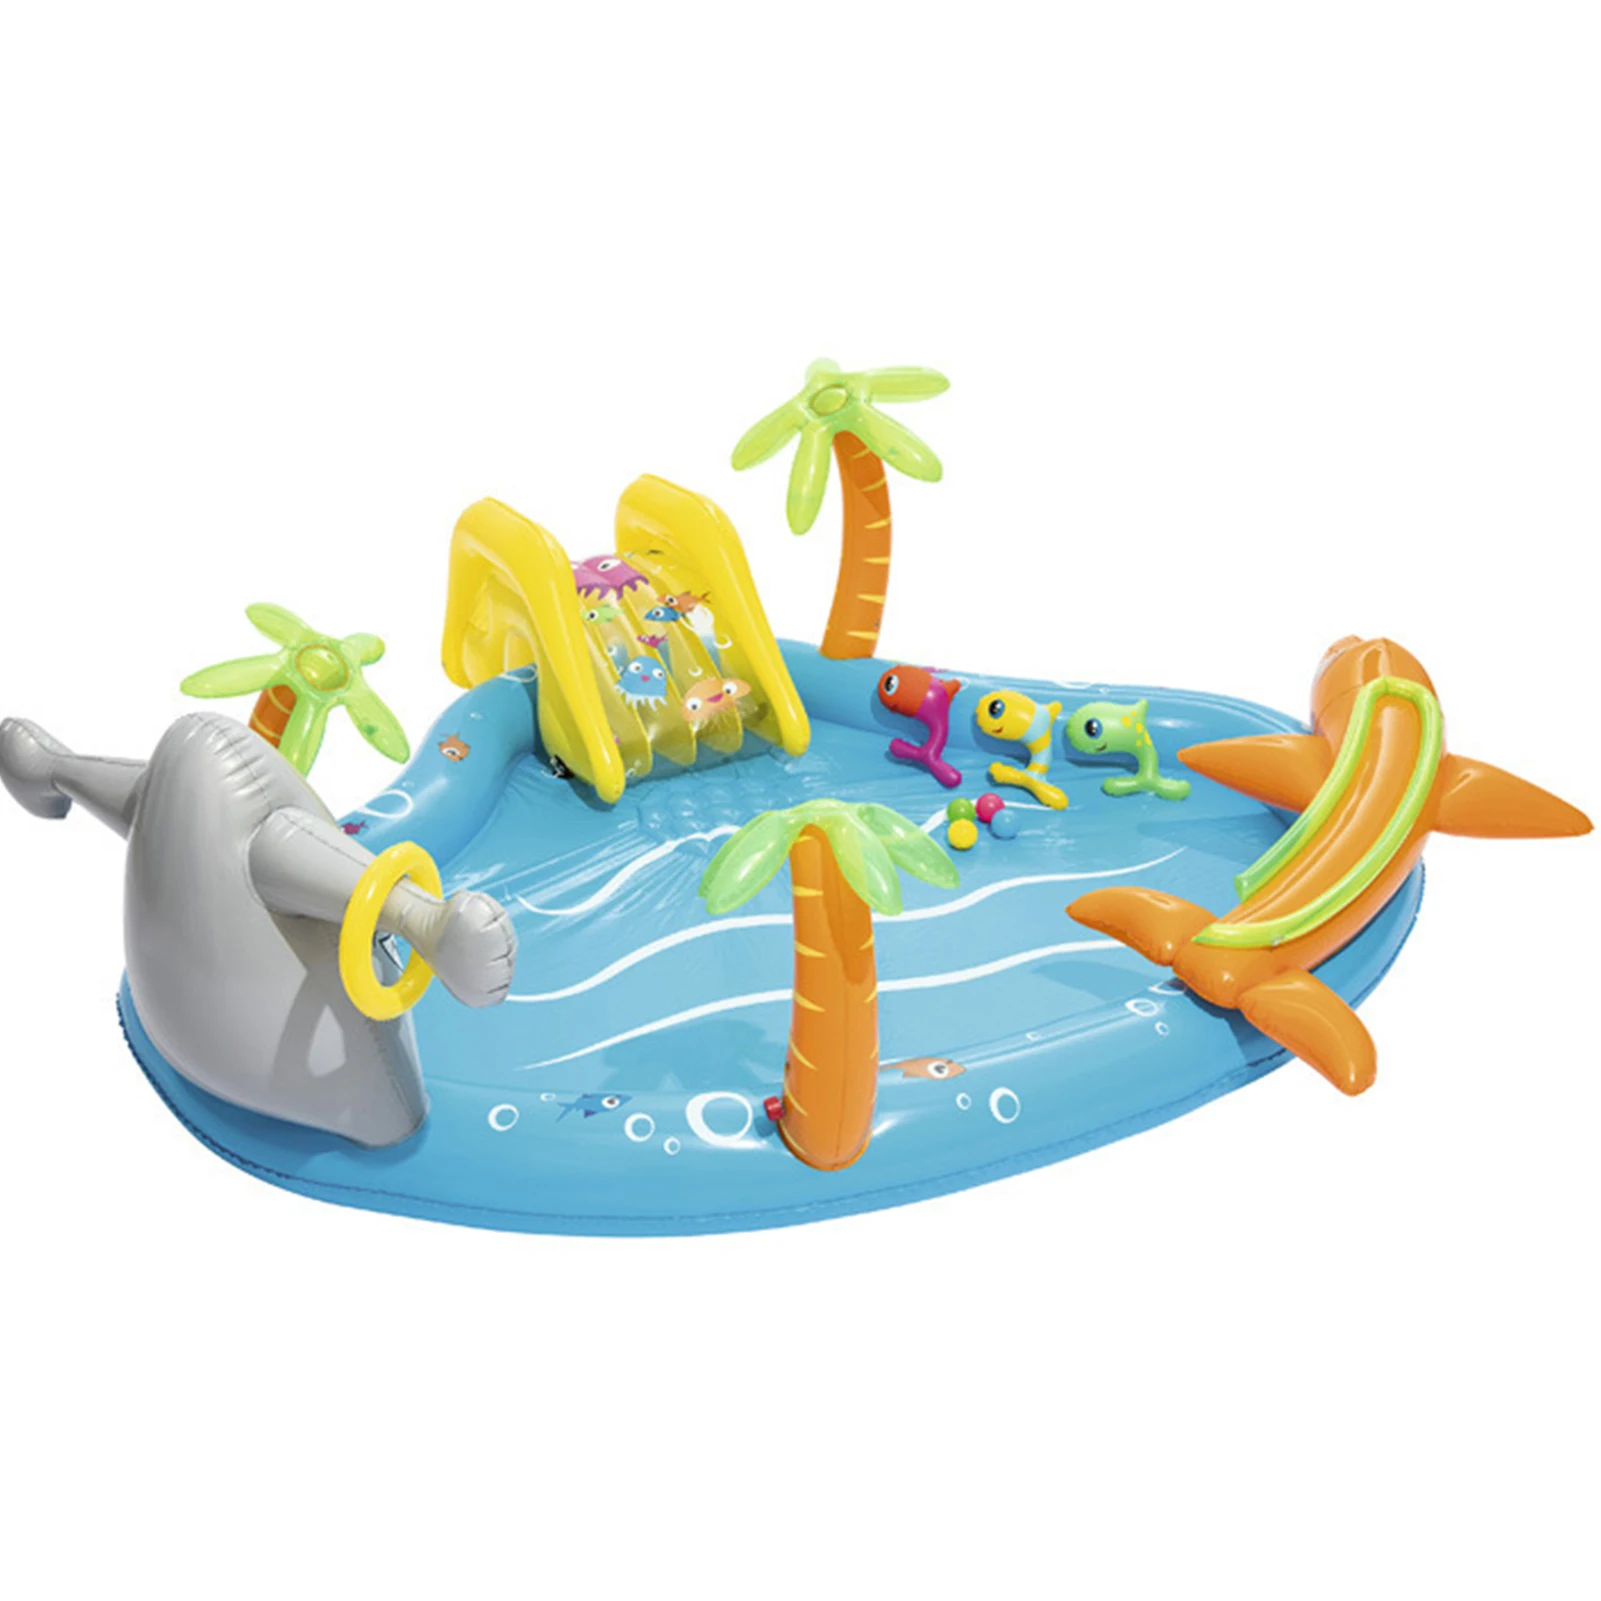 

Water Slide Summer Water Toy Dinosaur Fountain Outdoor Sprinkler Mat Dinosaur Inflatable Swimming Pool Play Center Pool For Kid